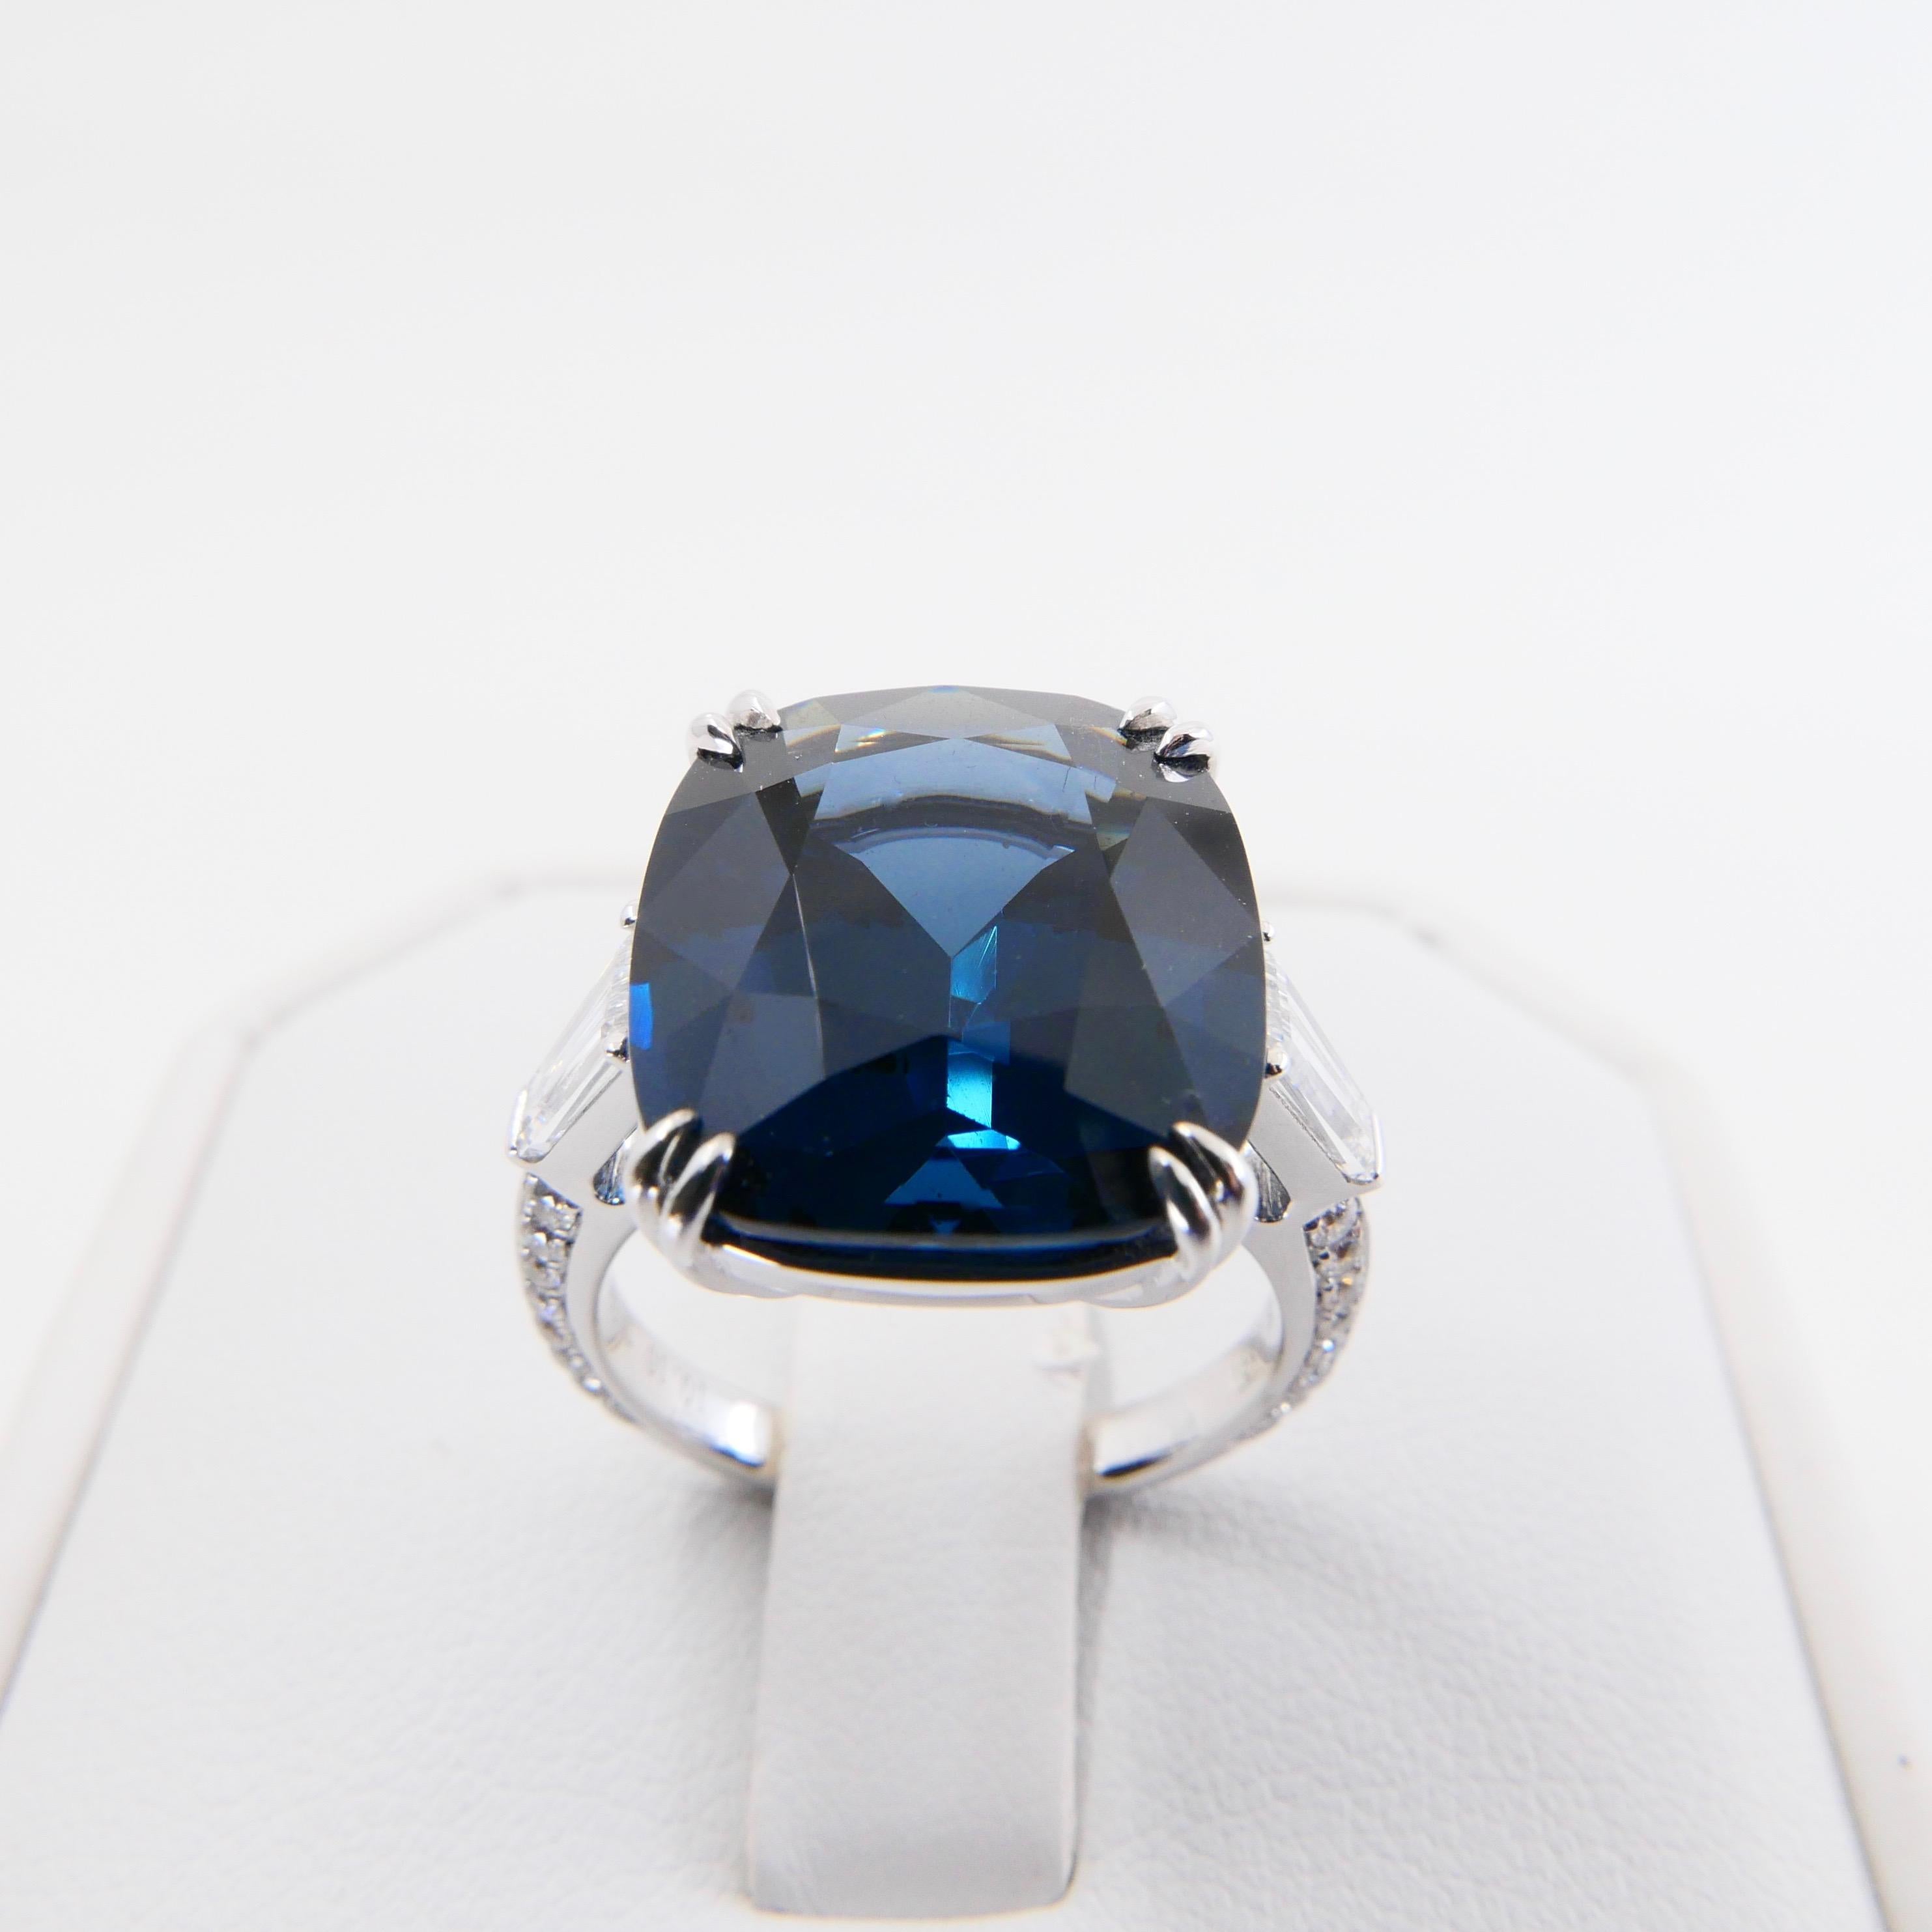 Important Certified 10.10 Carat Cobalt Spinel Diamond Cocktail Ring. Exquisite. 5